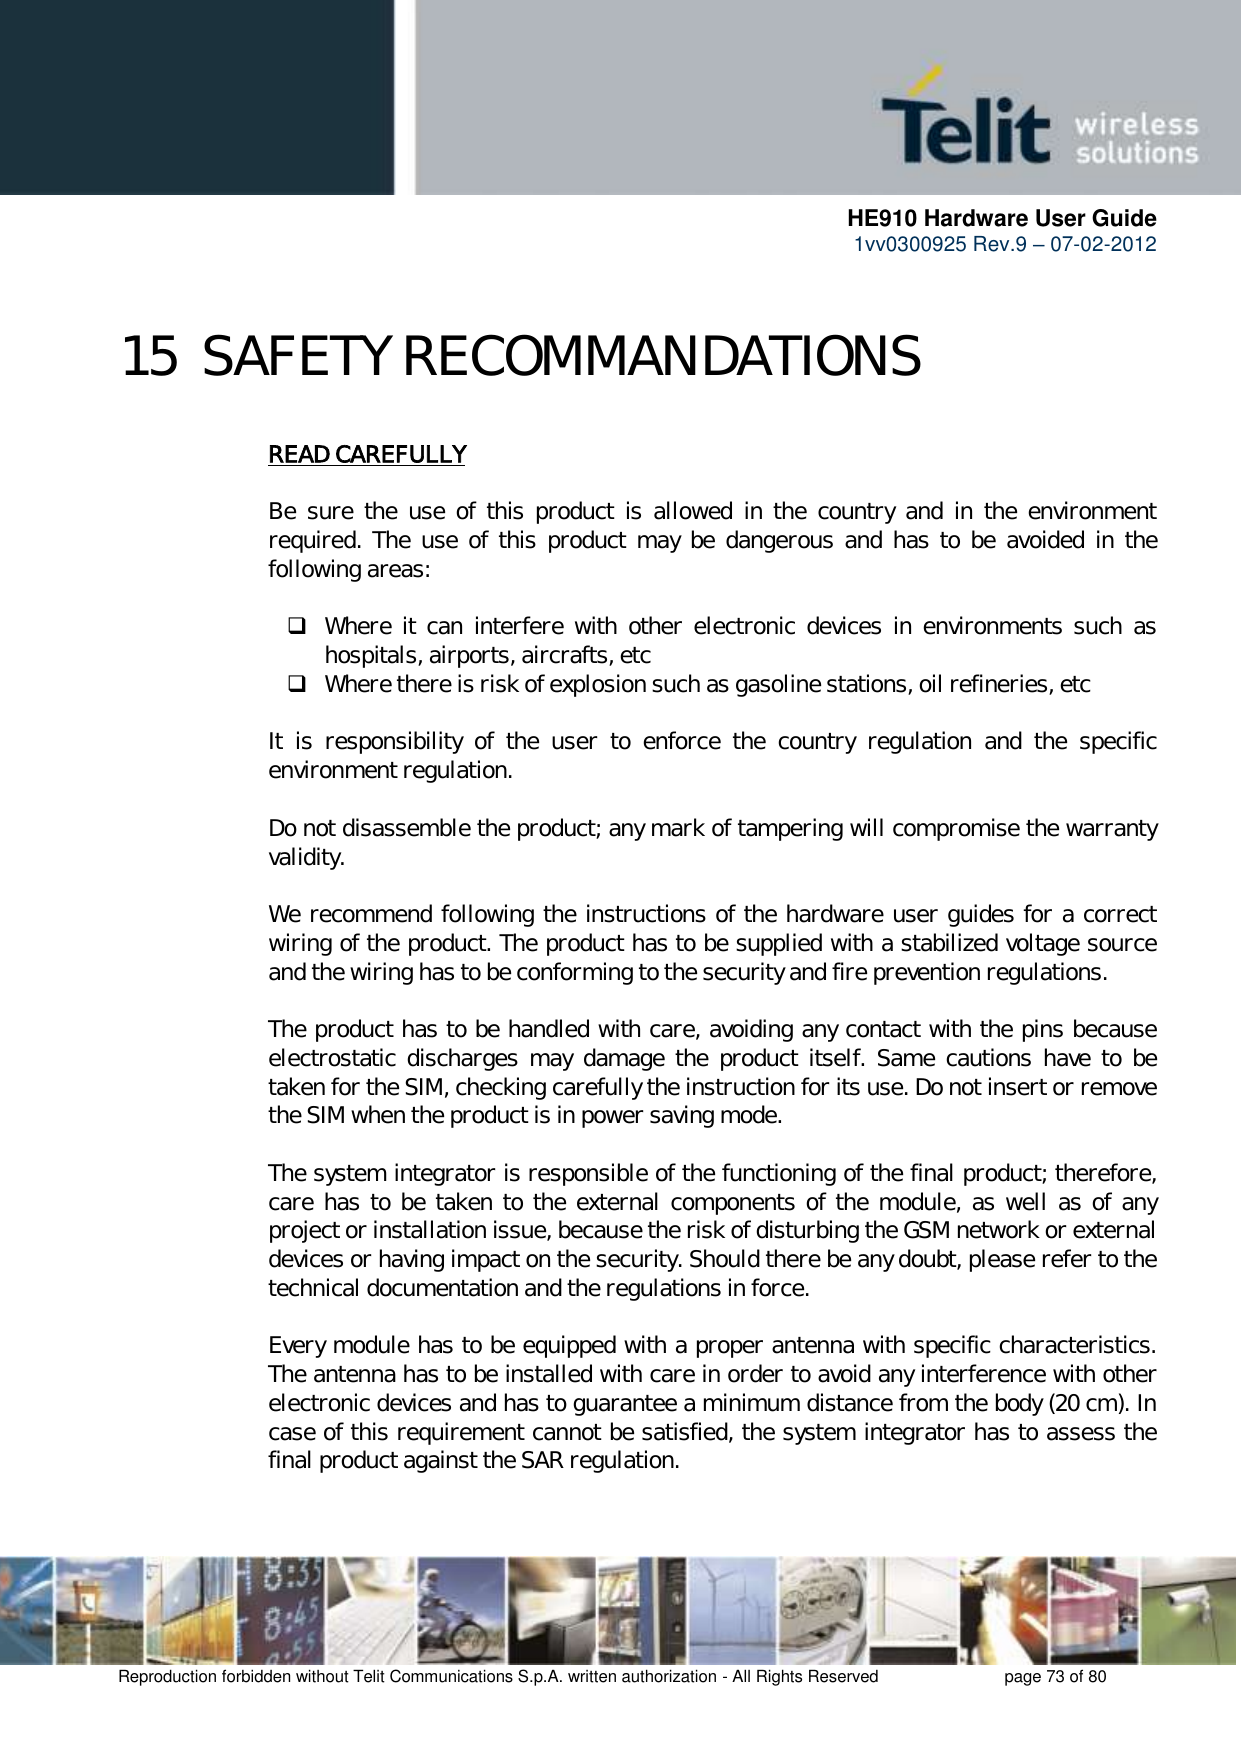      HE910 Hardware User Guide 1vv0300925 Rev.9 – 07-02-2012    Reproduction forbidden without Telit Communications S.p.A. written authorization - All Rights Reserved    page 73 of 80   15 SAFETY RECOMMANDATIONS READ CAREFULLY  Be  sure  the  use  of  this  product  is  allowed  in  the  country  and  in  the  environment required.  The  use of  this  product  may  be  dangerous  and  has  to  be  avoided  in  the following areas:   Where  it  can  interfere  with  other  electronic  devices  in environments  such  as hospitals, airports, aircrafts, etc  Where there is risk of explosion such as gasoline stations, oil refineries, etc   It  is  responsibility  of  the  user  to  enforce  the  country  regulation  and  the  specific environment regulation.  Do not disassemble the product; any mark of tampering will compromise the warranty validity.  We recommend following the instructions of the hardware user guides for a correct wiring of the product. The product has to be supplied with a stabilized voltage source and the wiring has to be conforming to the security and fire prevention regulations.  The product has to be handled with care, avoiding any contact with the pins because electrostatic  discharges  may  damage  the  product  itself.  Same  cautions  have  to  be taken for the SIM, checking carefully the instruction for its use. Do not insert or remove the SIM when the product is in power saving mode.  The system integrator is responsible of the functioning of the final product; therefore, care has to be taken to the external components of the module, as well as of  any project or installation issue, because the risk of disturbing the GSM network or external devices or having impact on the security. Should there be any doubt, please refer to the technical documentation and the regulations in force.  Every module has to be equipped with a proper antenna with specific characteristics. The antenna has to be installed with care in order to avoid any interference with other electronic devices and has to guarantee a minimum distance from the body (20 cm). In case of this requirement cannot be satisfied, the system integrator has to assess the final product against the SAR regulation.   